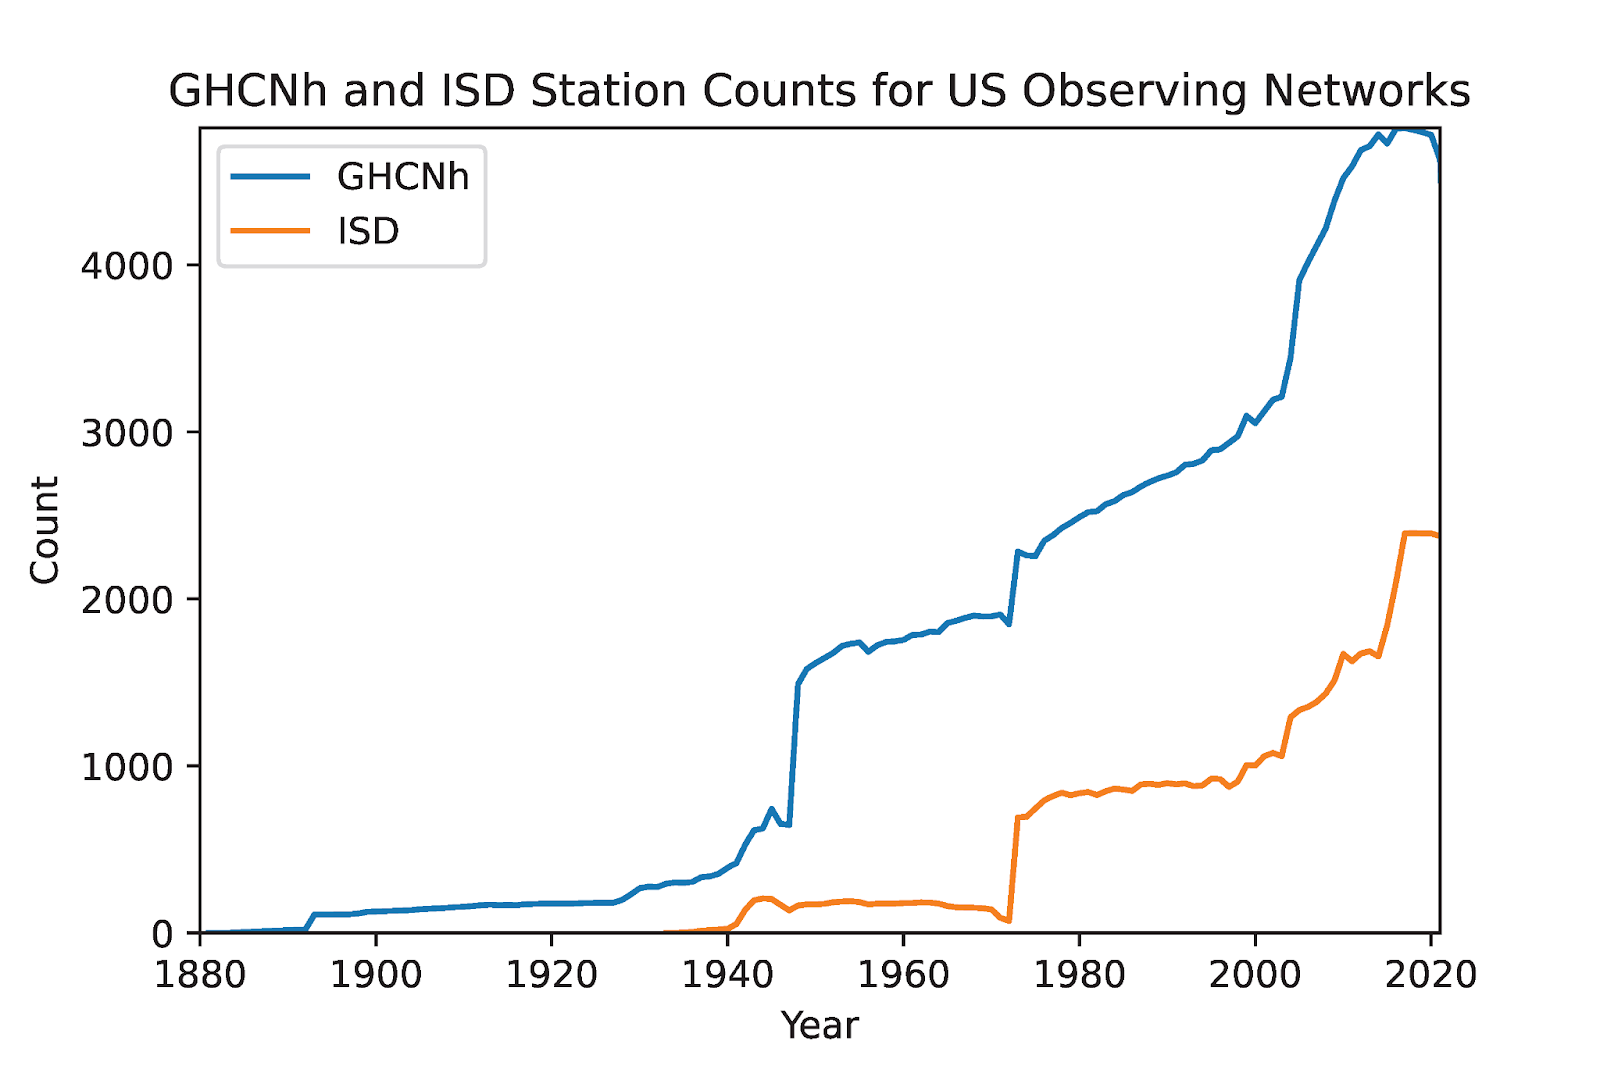 Time series showing the number of stations with hourly data by year for US Observing Networks. A blue line shows the number of GHCNh stations steadily increasing towards the current day, with ISD station numbers shown with an orange line steadily increasing to the present day. The ISD number of stations remains lower than GHCNh stations for the entire graph.